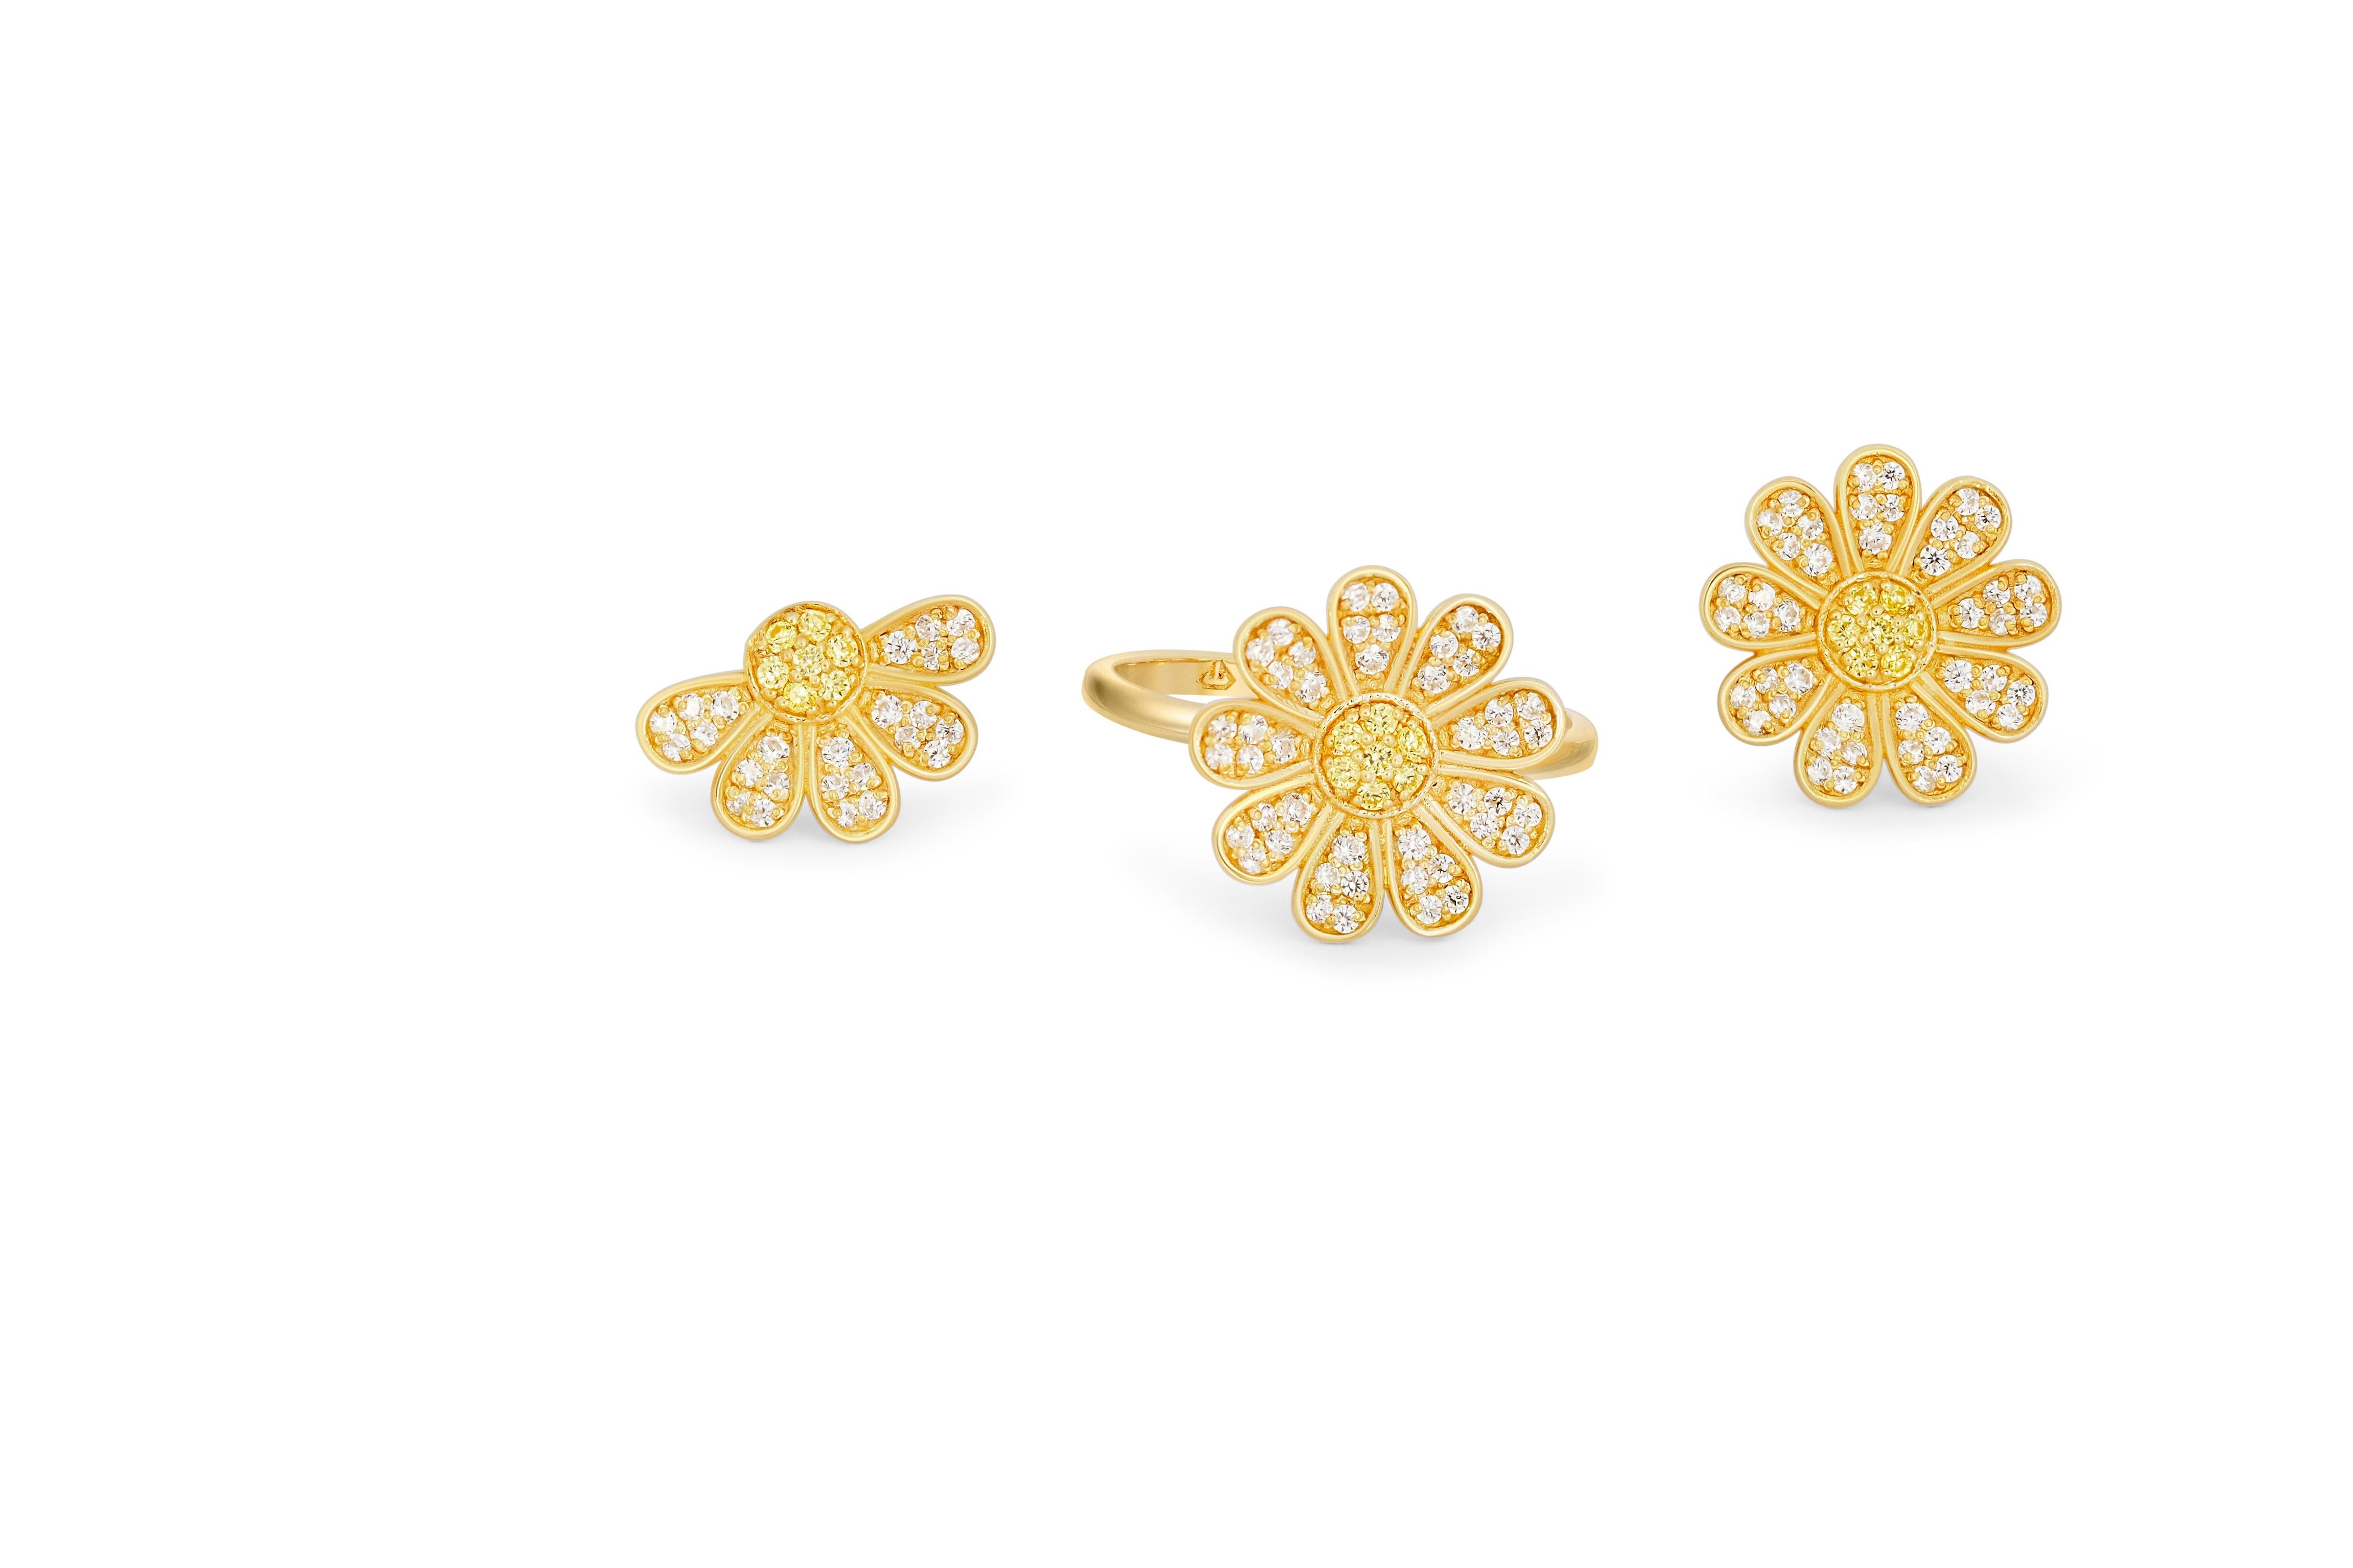 Daisy flower 14k gold ring and earrings set. Love Me, Love Me Not 14k gold ring and earrings. Flora engagement ring with with moissanites and lab sapphires in 14k gold. Vintage style moissanite jewelry. Lucky gold jewelry set. 

Ring: 
Metal: 14k